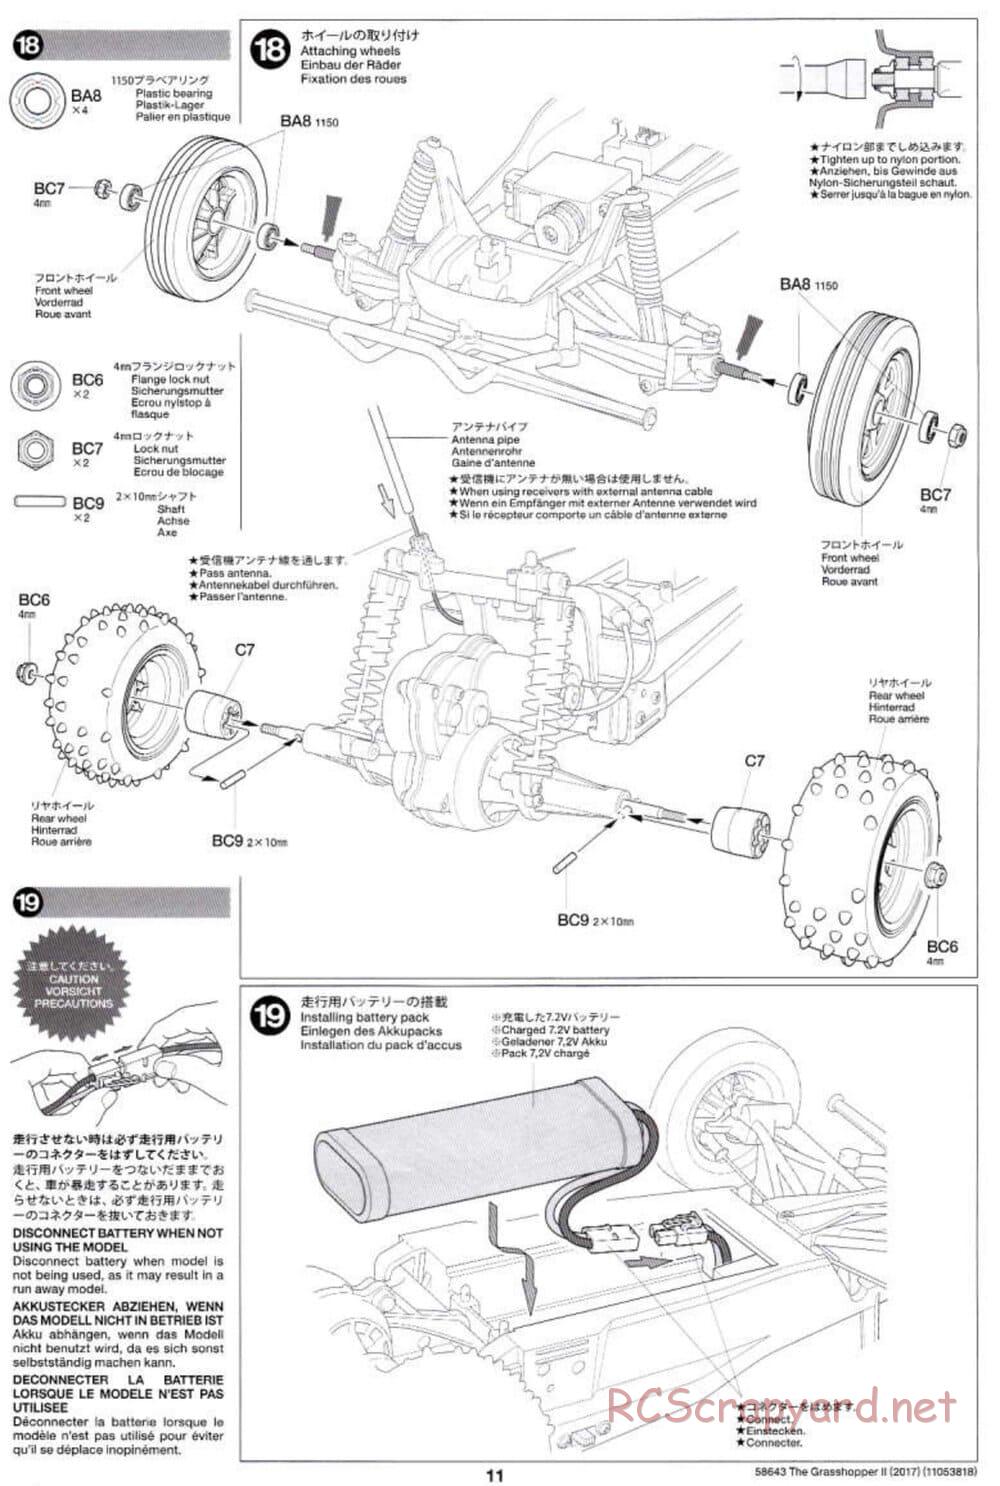 Tamiya - The Grasshopper II (2017) - GH Chassis - Manual - Page 11